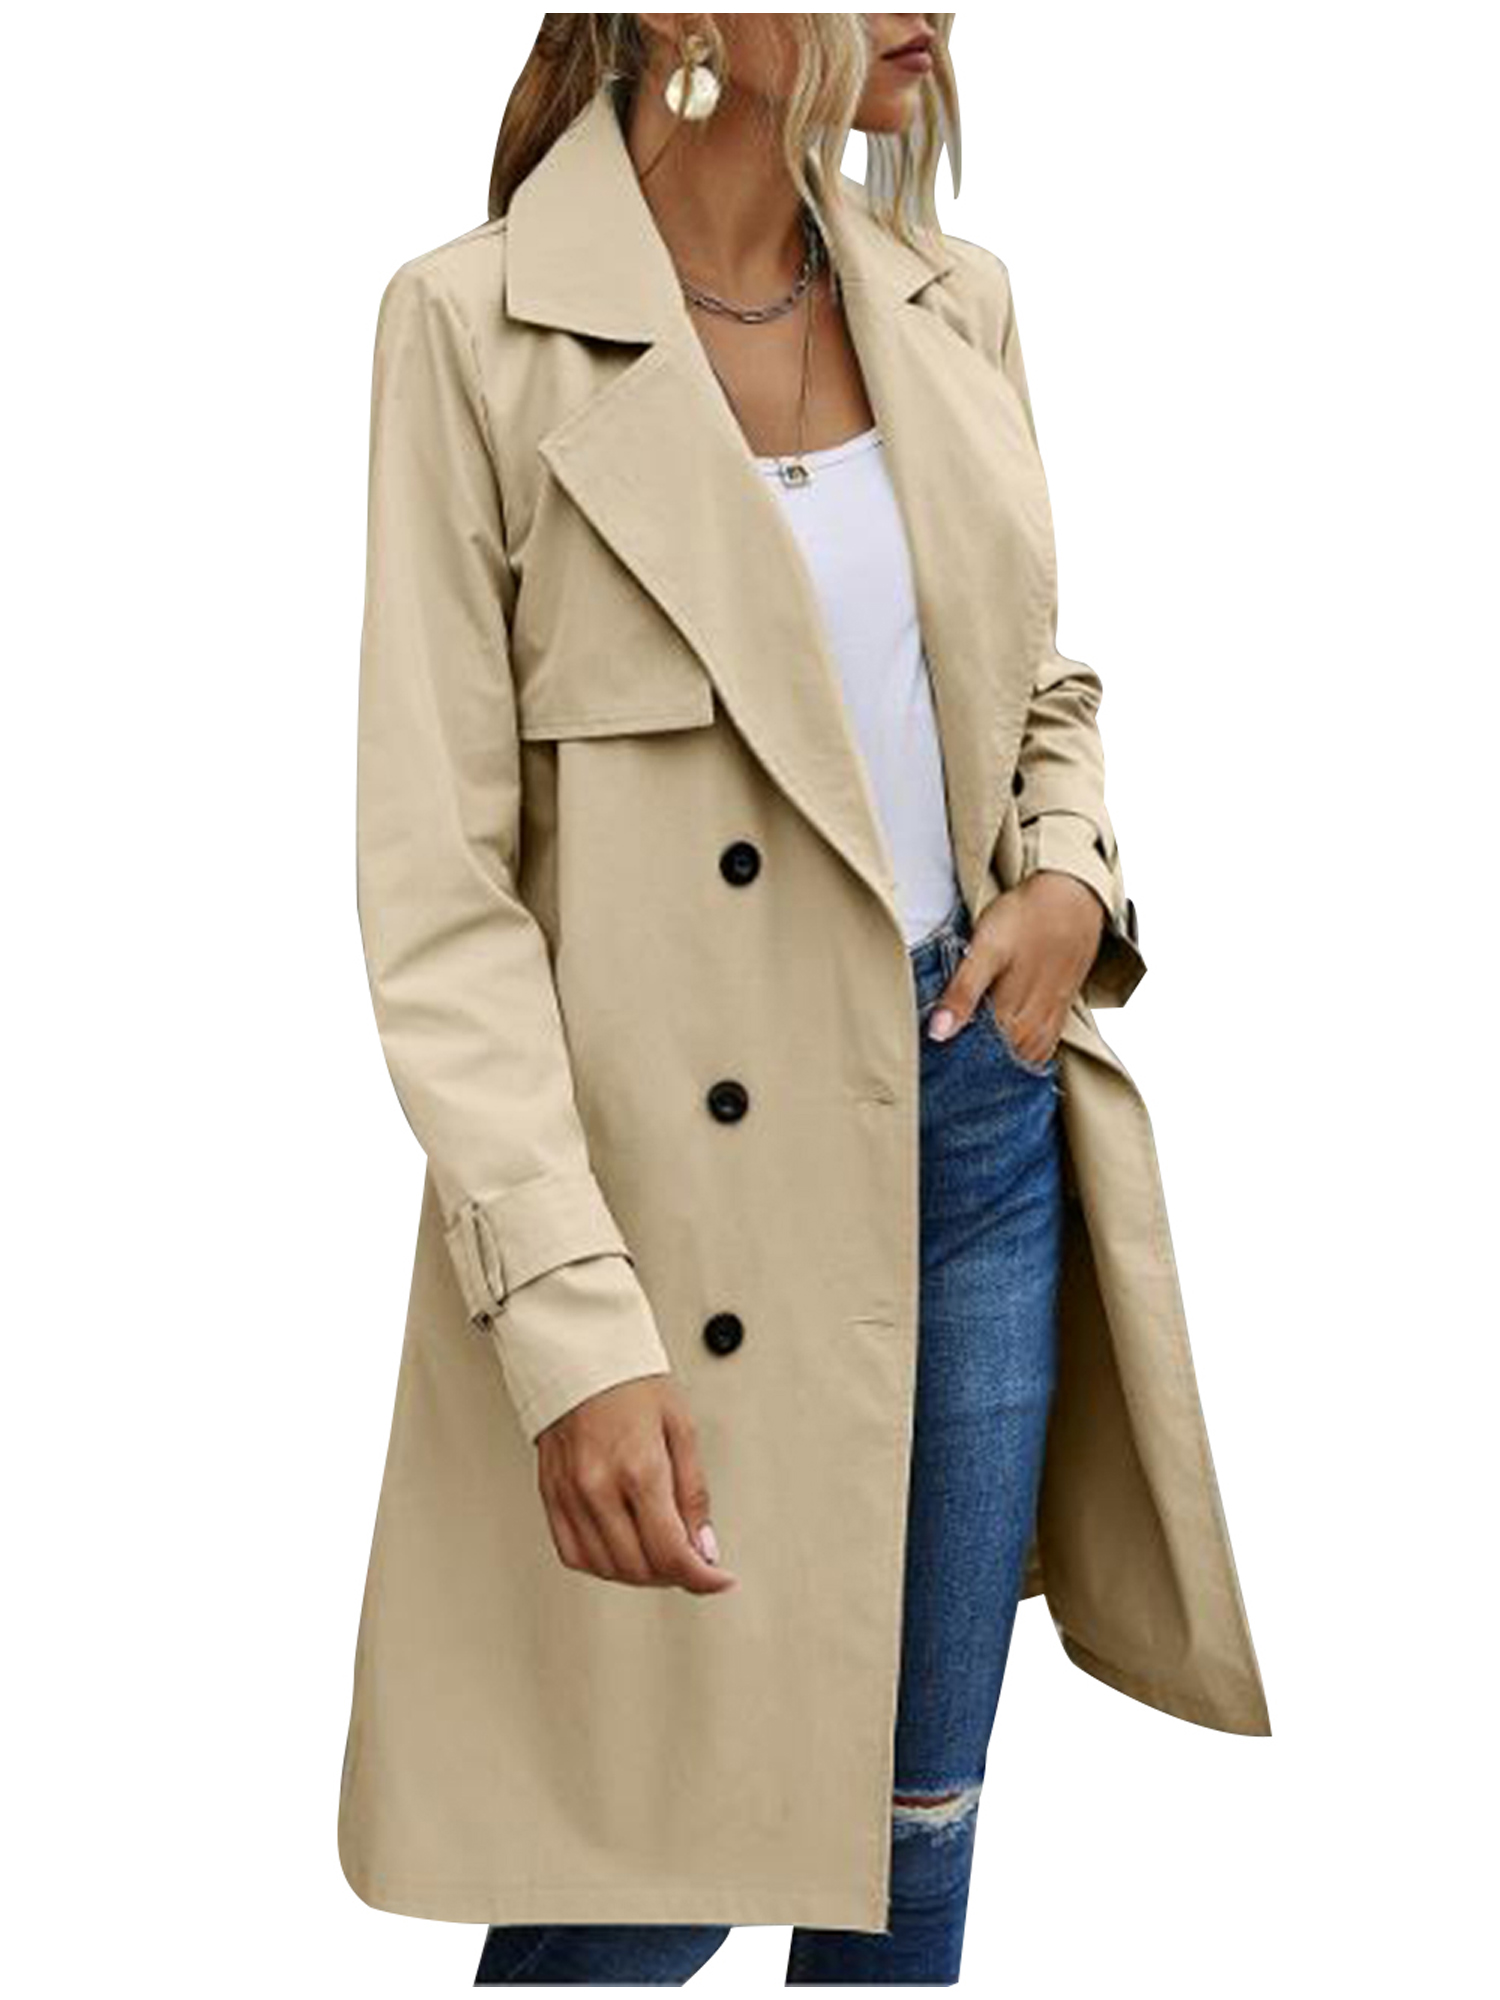 Spring hue Women Jacket Long Sleeve Lapel Double Breasted Belted Trench Coat - image 5 of 5